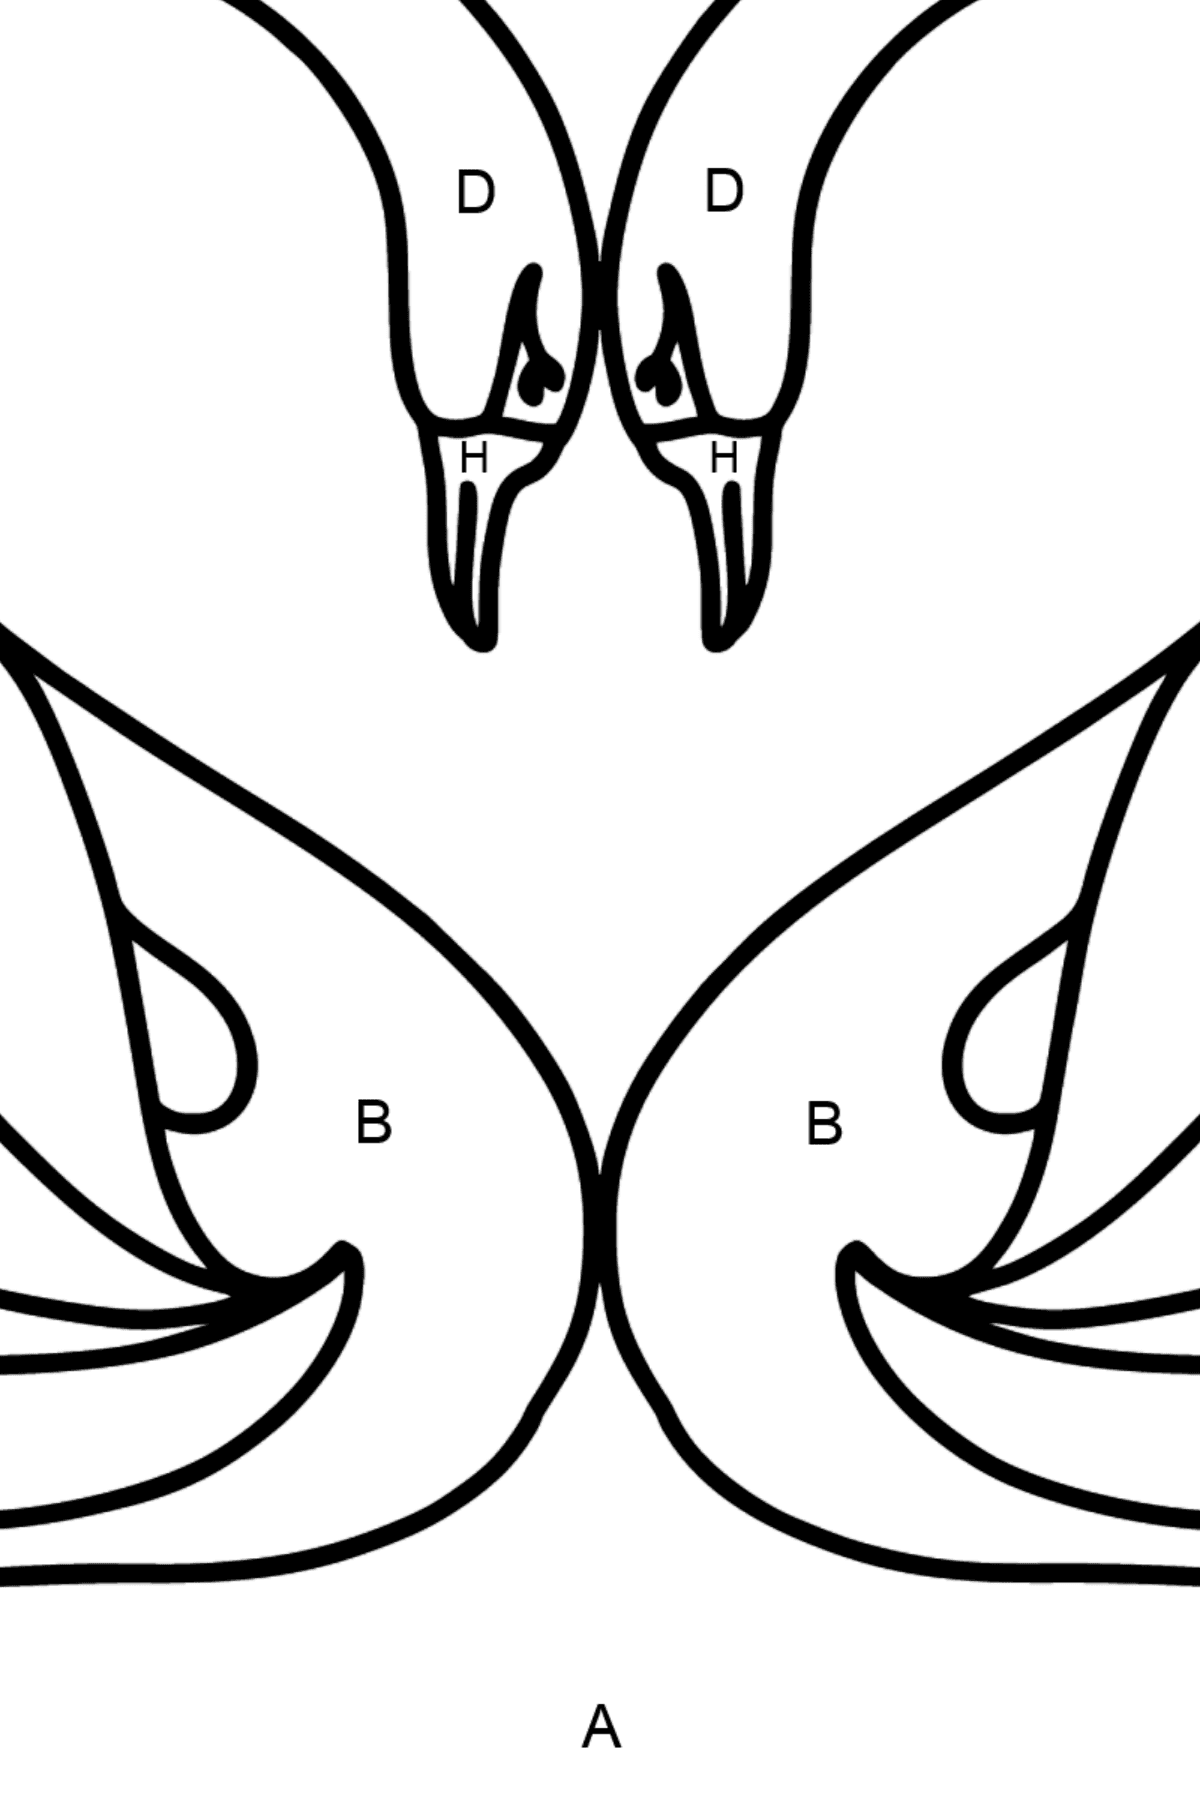 Black Swans coloring page - Coloring by Letters for Kids